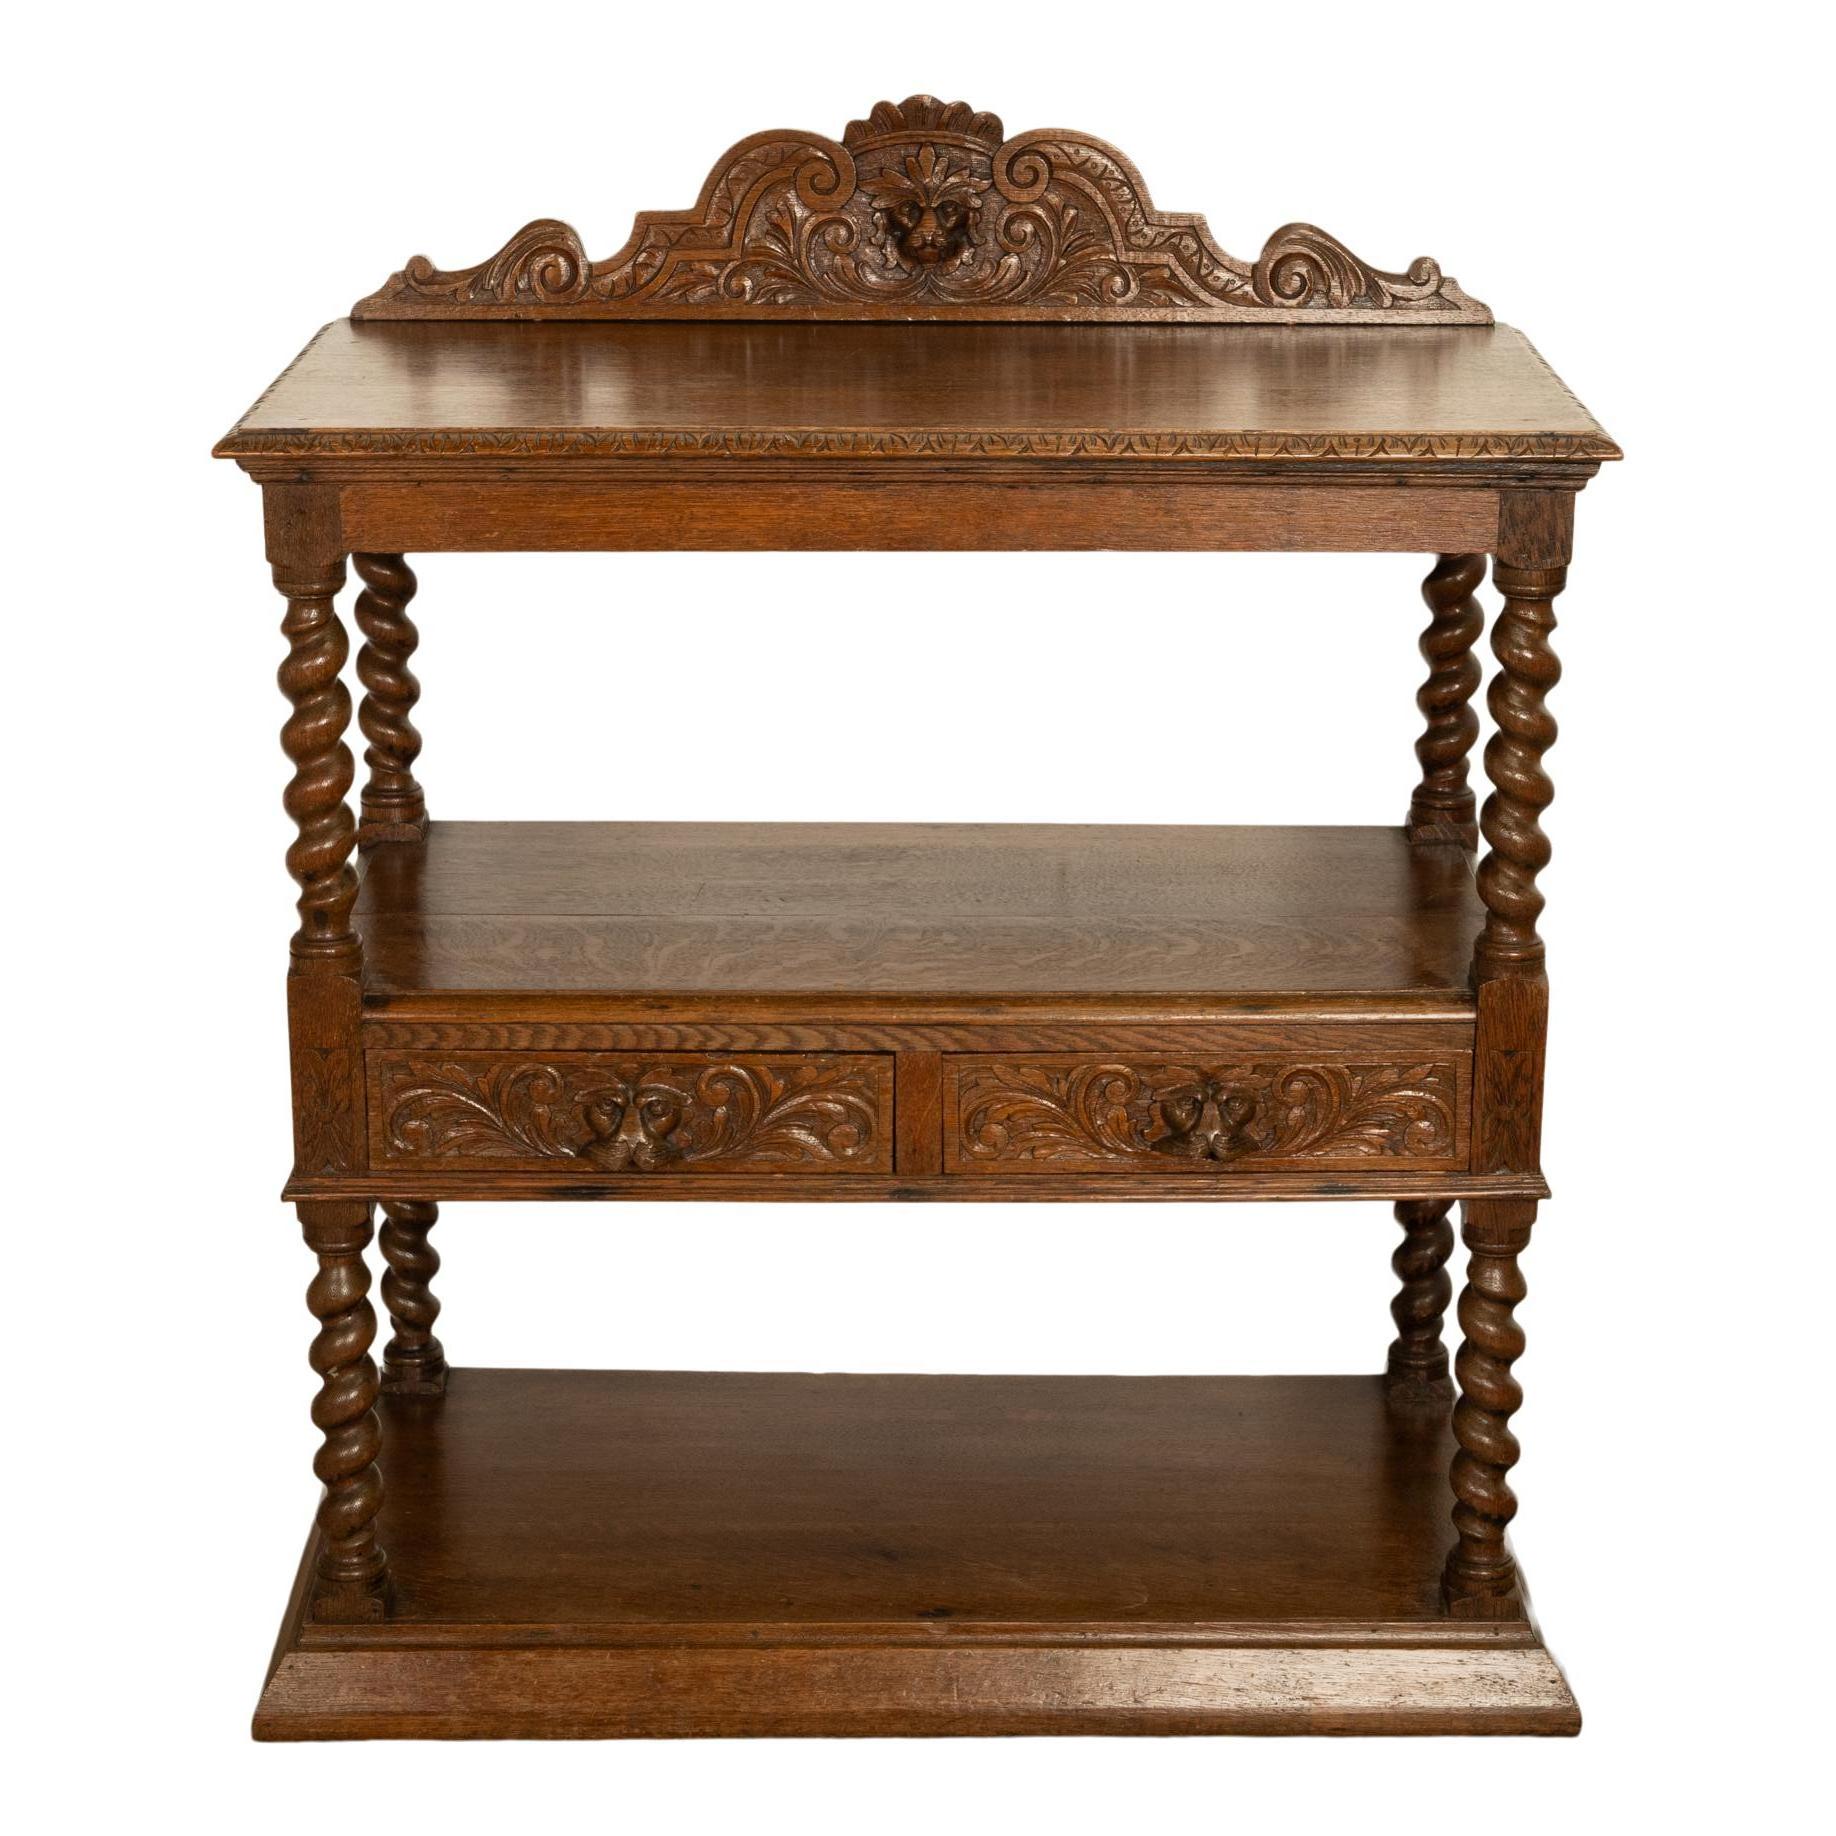 Antique French Renaissance Revival Carved Oak Barley Twist Server Buffet 1870 In Good Condition For Sale In Portland, OR